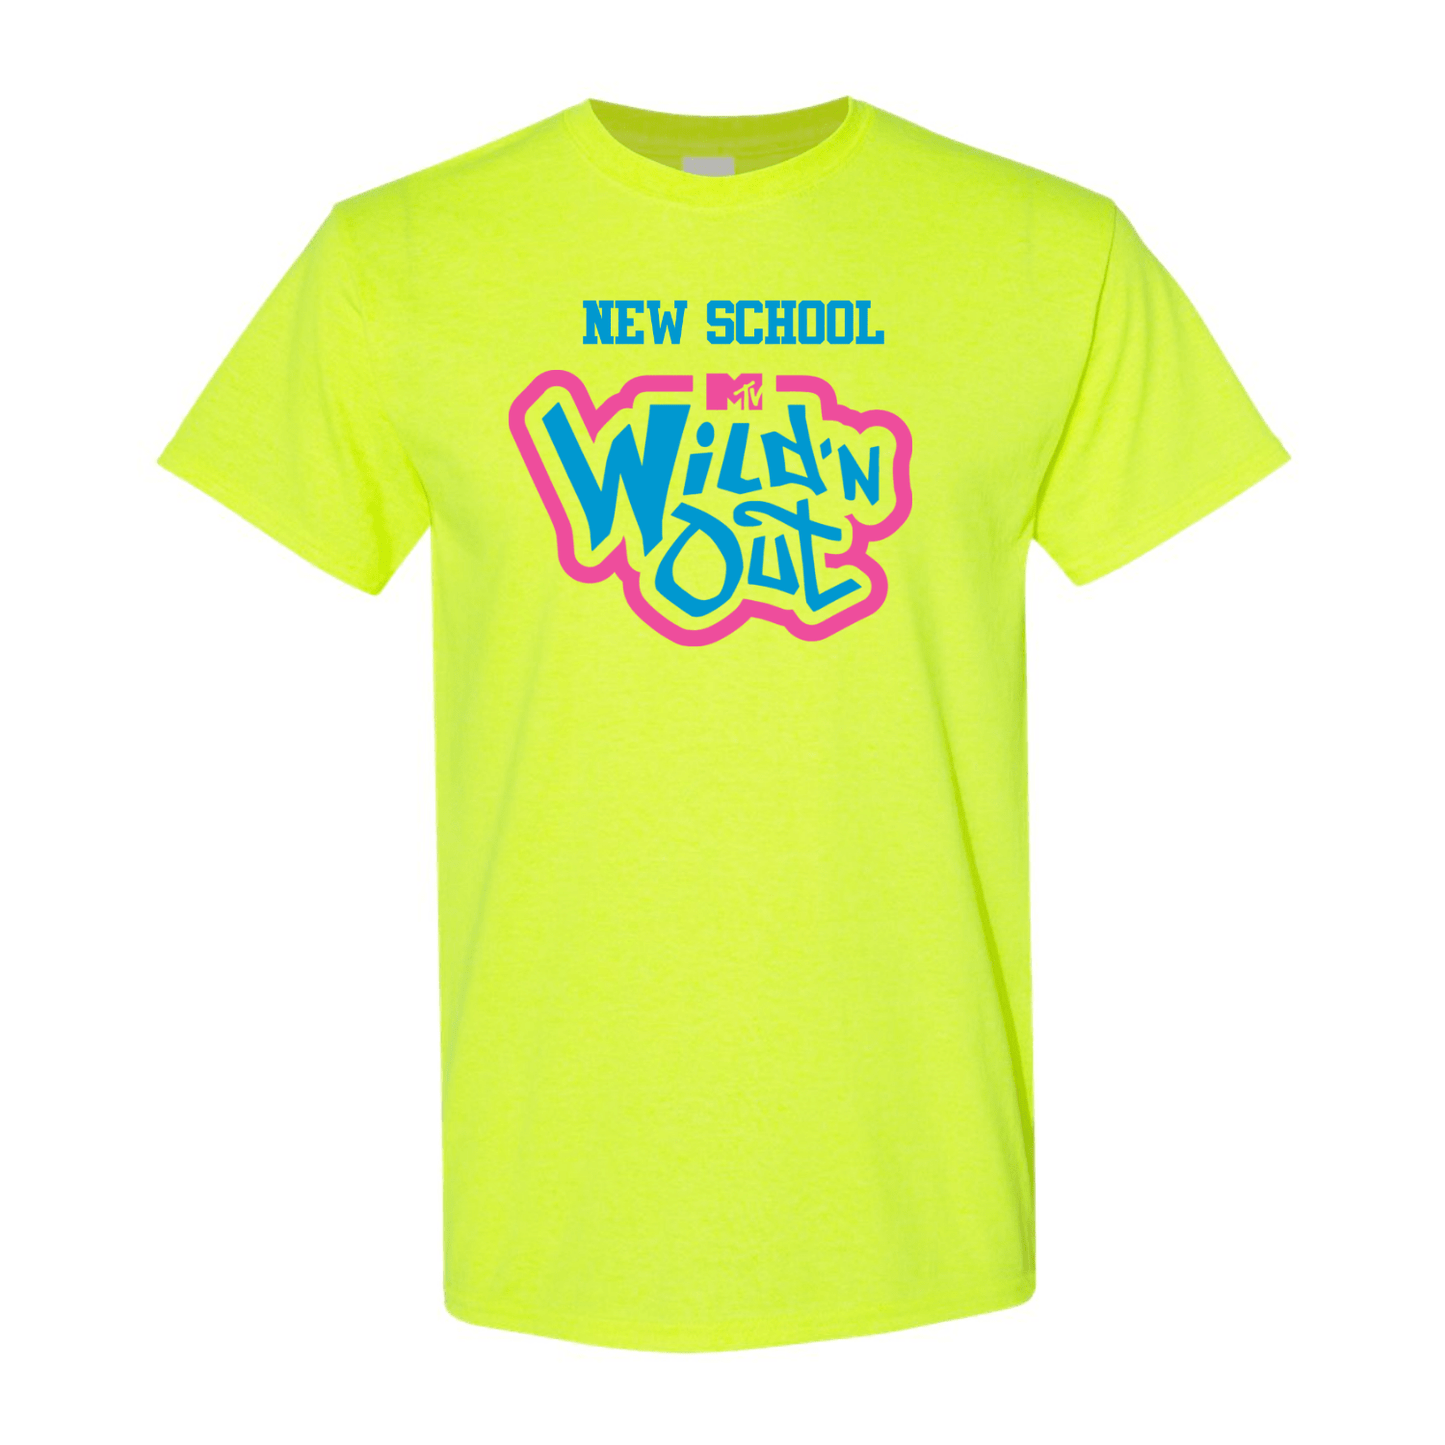 Wild 'N Out Neon Yellow New School Adult Short Sleeve T - Shirt - Paramount Shop